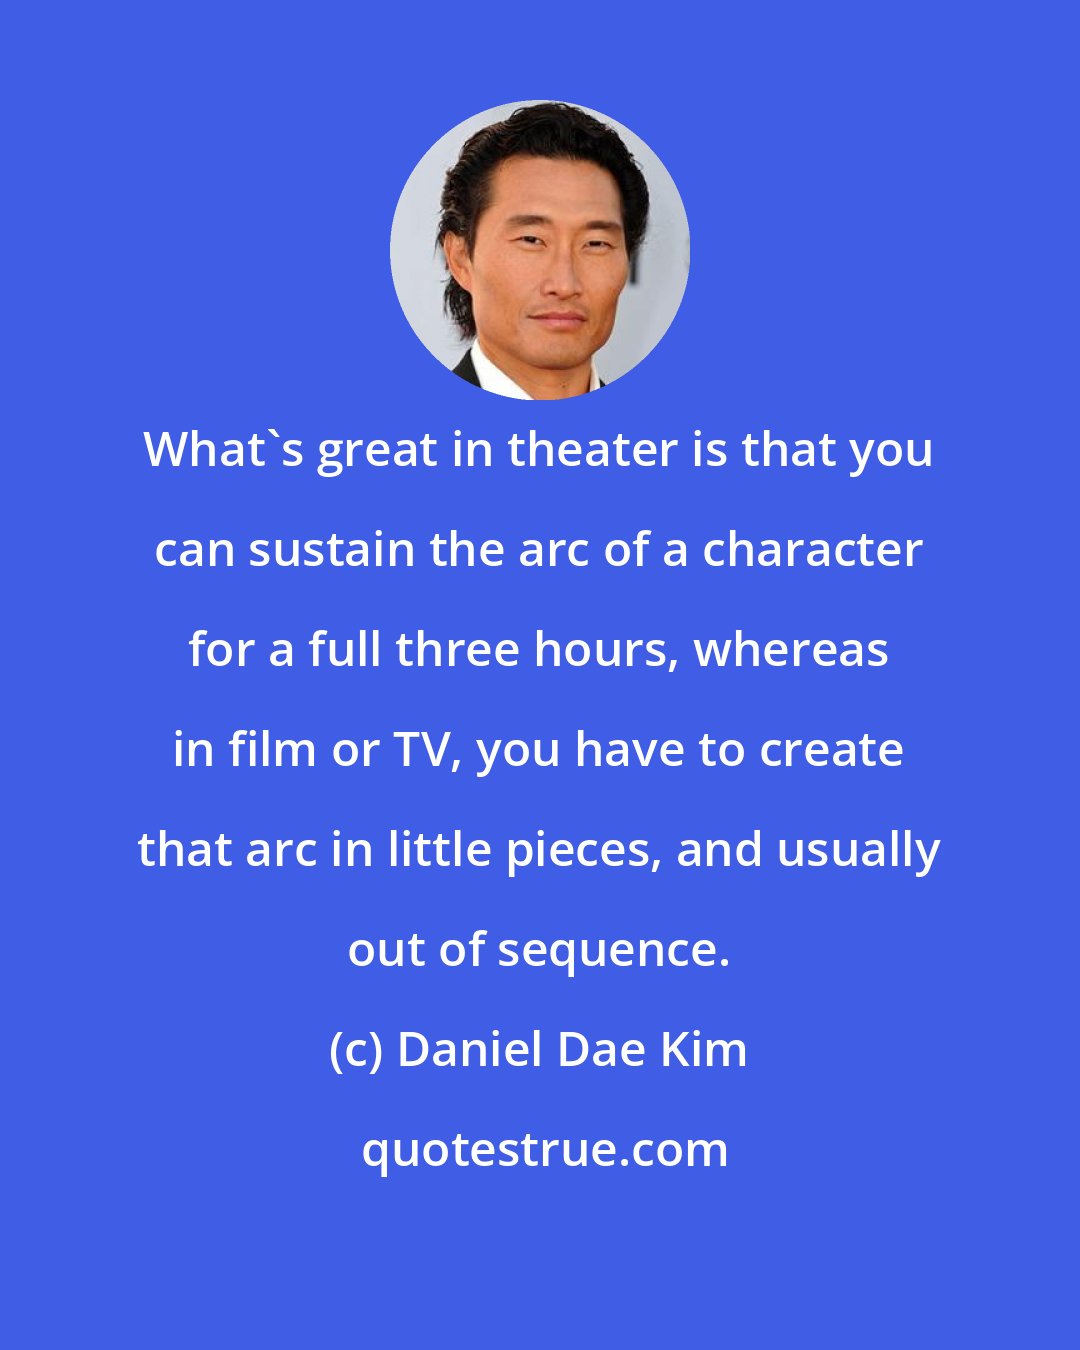 Daniel Dae Kim: What's great in theater is that you can sustain the arc of a character for a full three hours, whereas in film or TV, you have to create that arc in little pieces, and usually out of sequence.